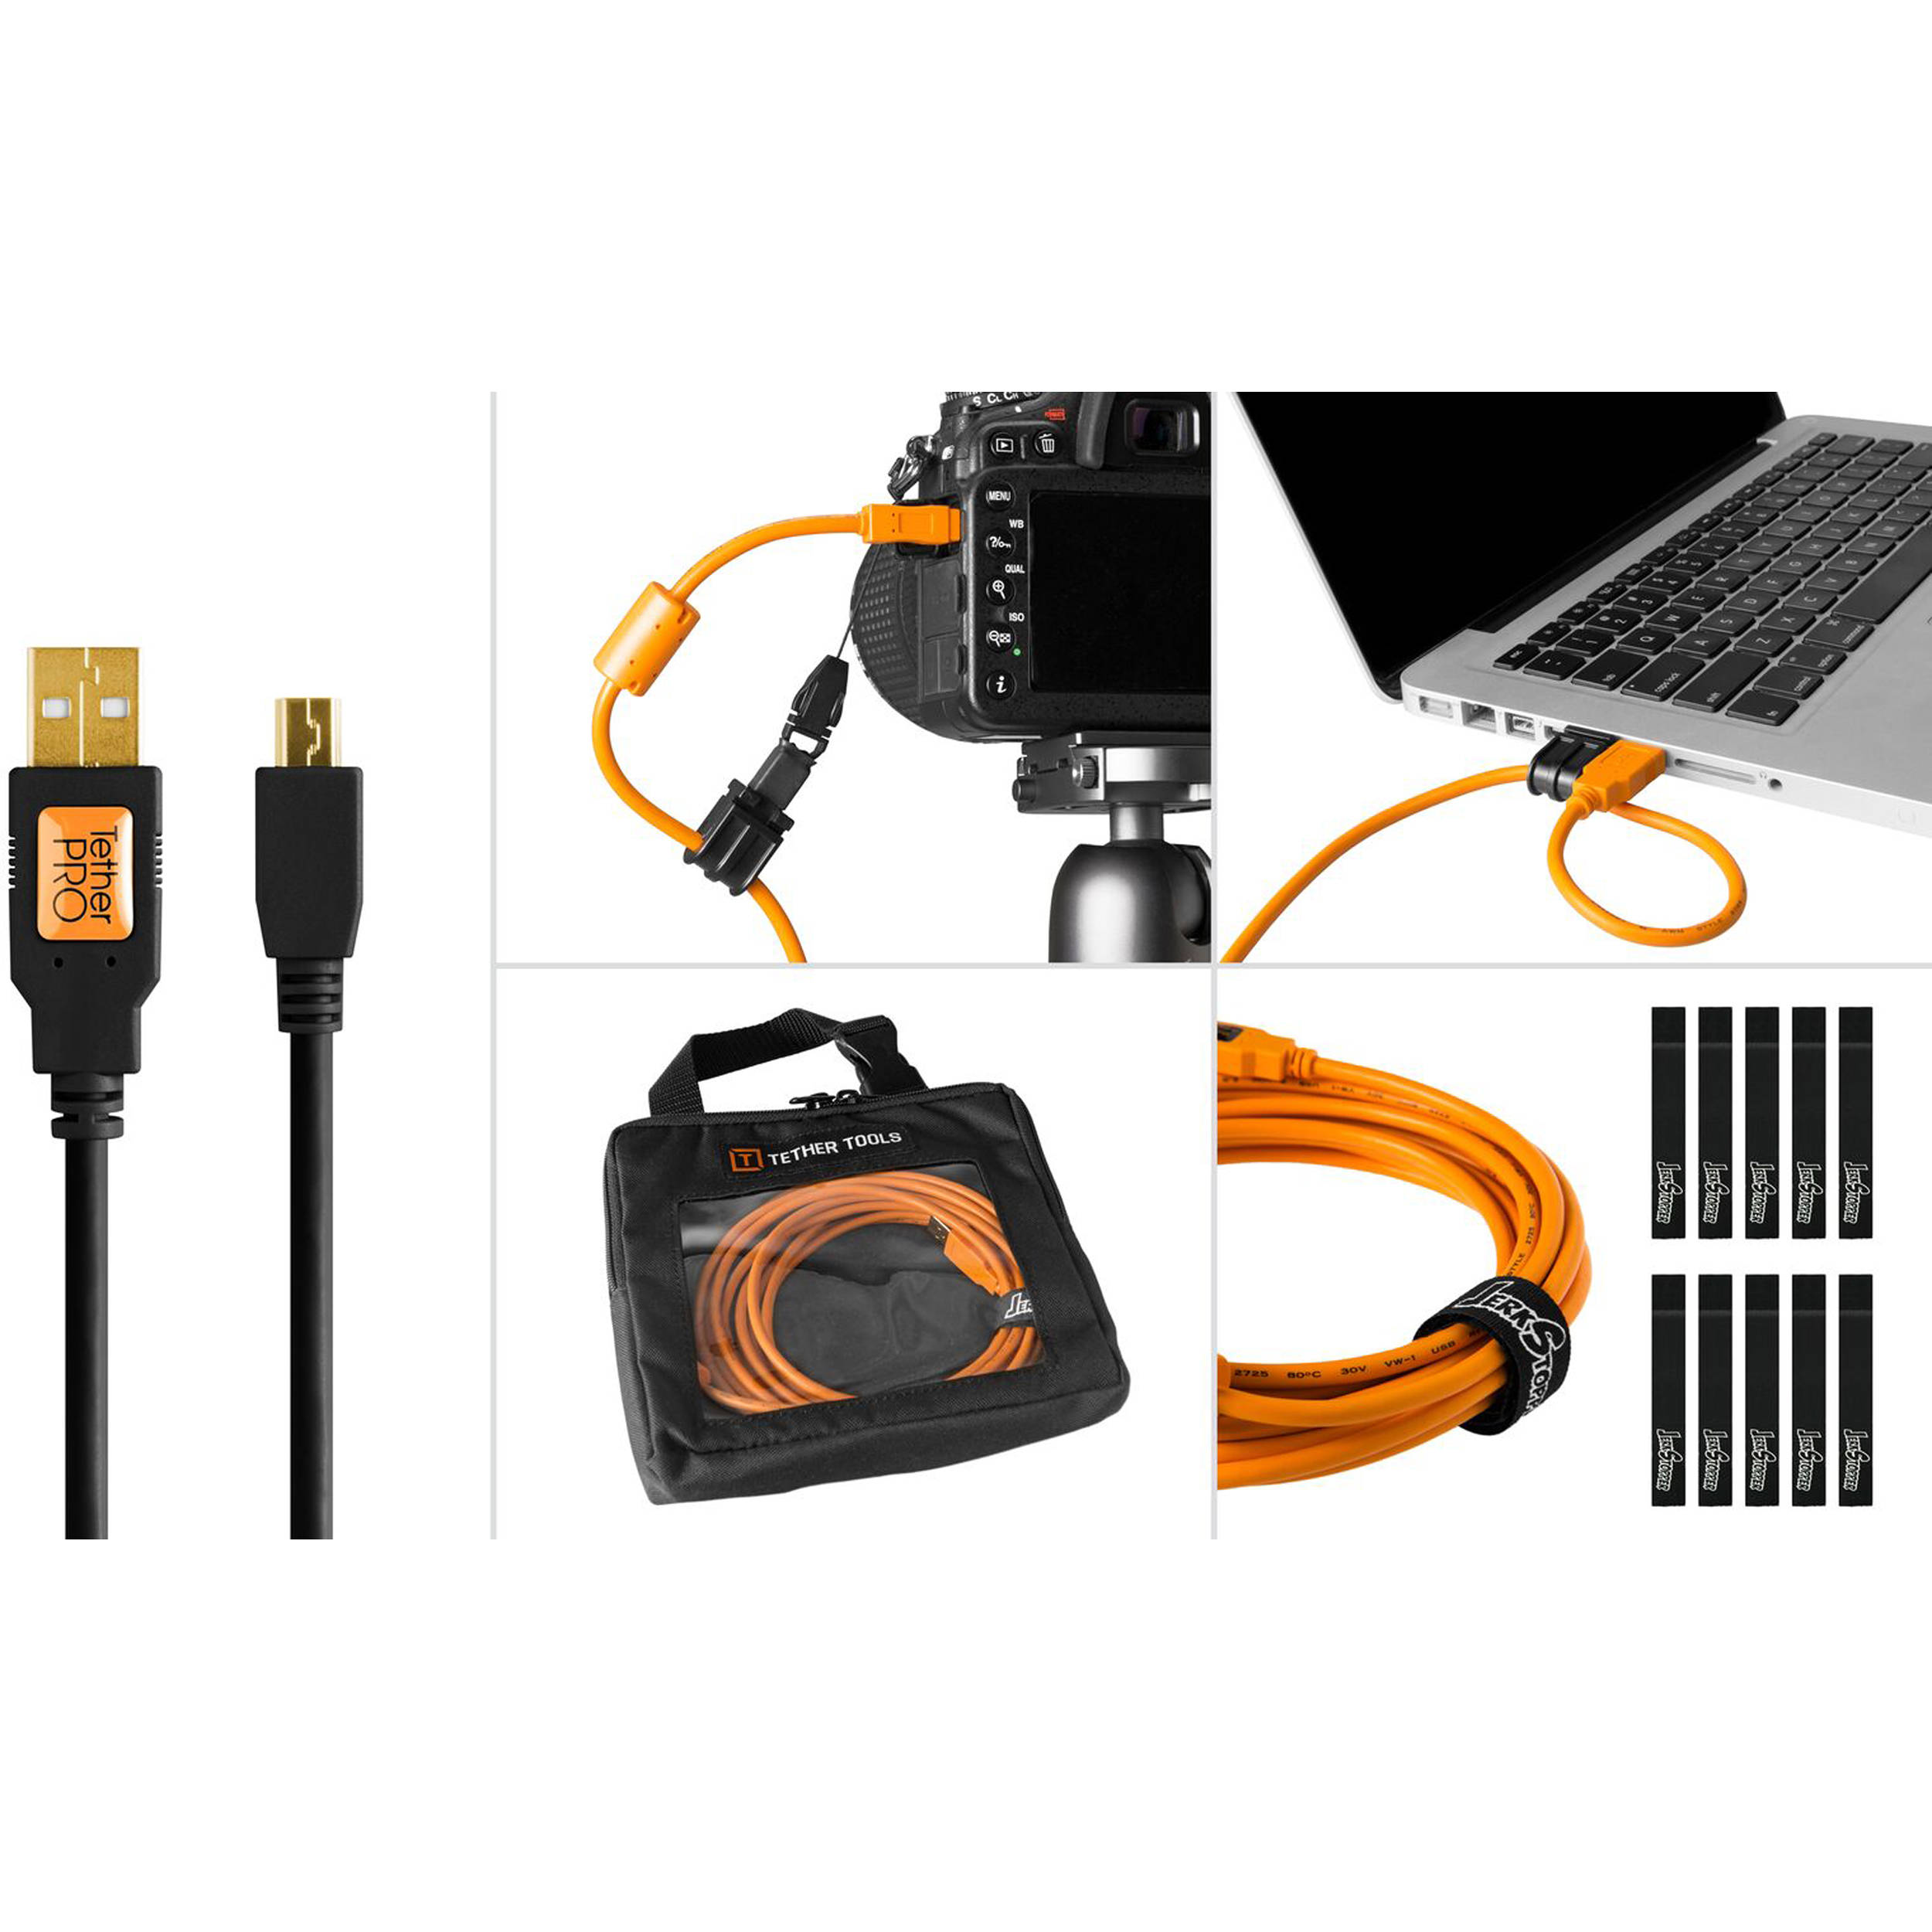 Tether Tools Starter Tethering Kit with USB 2.0 Type-A to Mini-B 5-Pin Cable (15', Black)